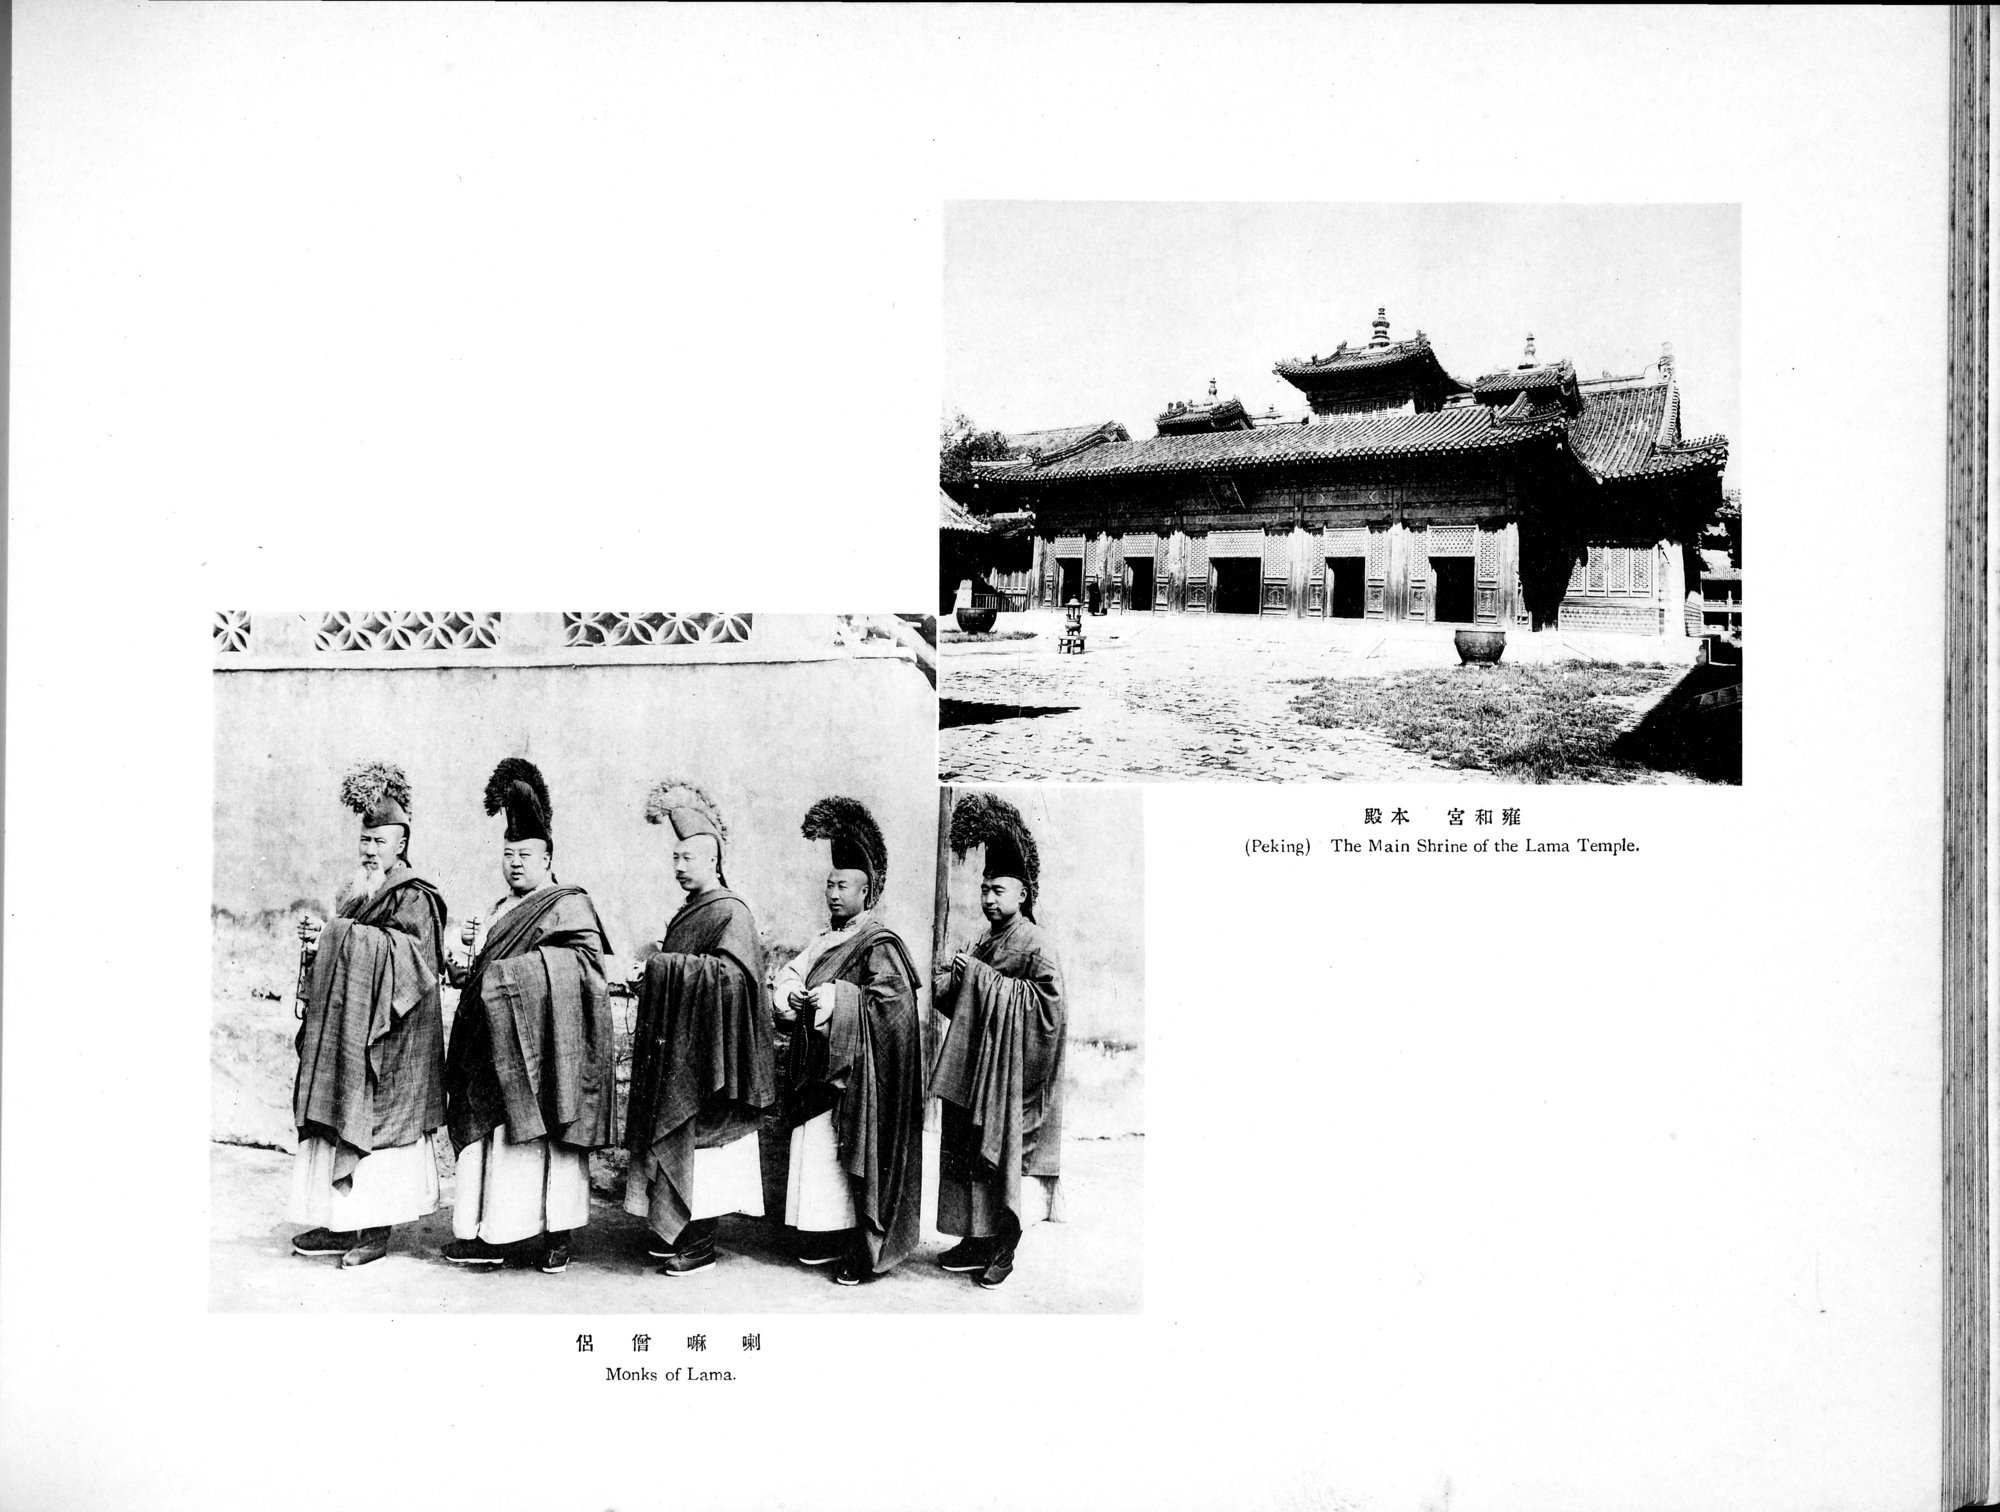 Views and Custom of North China : vol.1 / Page 123 (Grayscale High Resolution Image)